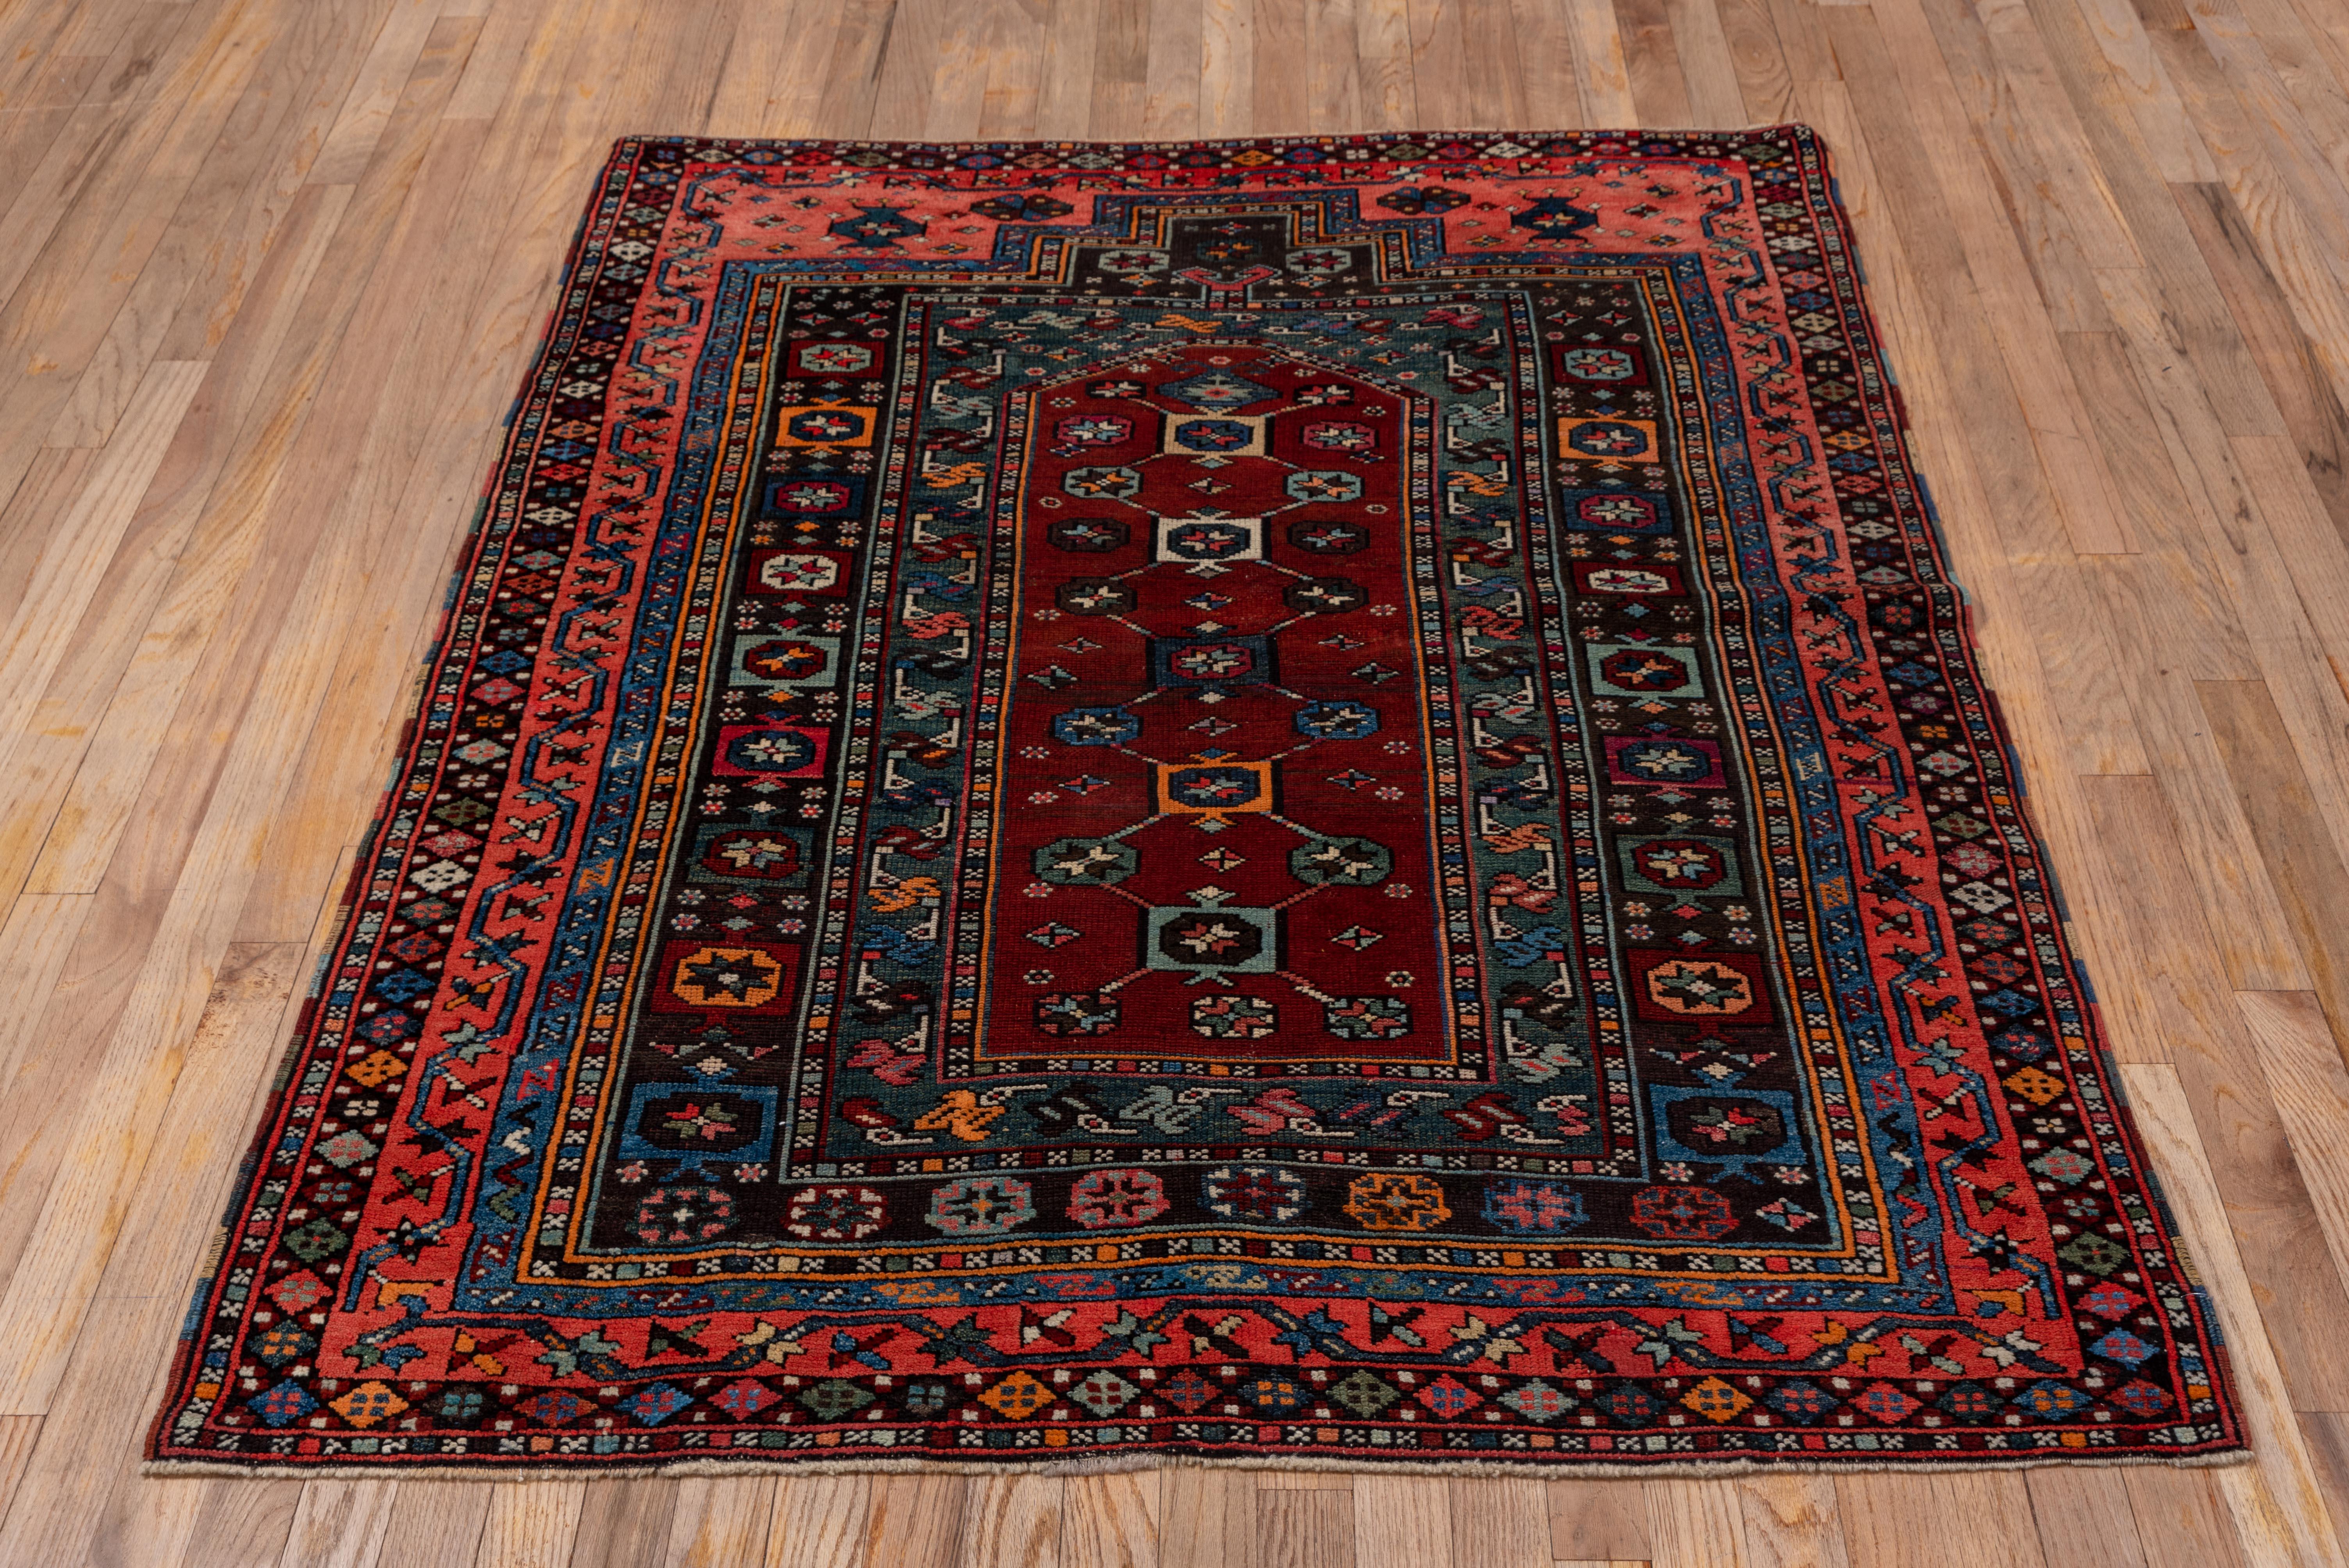 Royal Red and Pink Bubblegum Shirvan City Carpet Cira 1920 For Sale 1